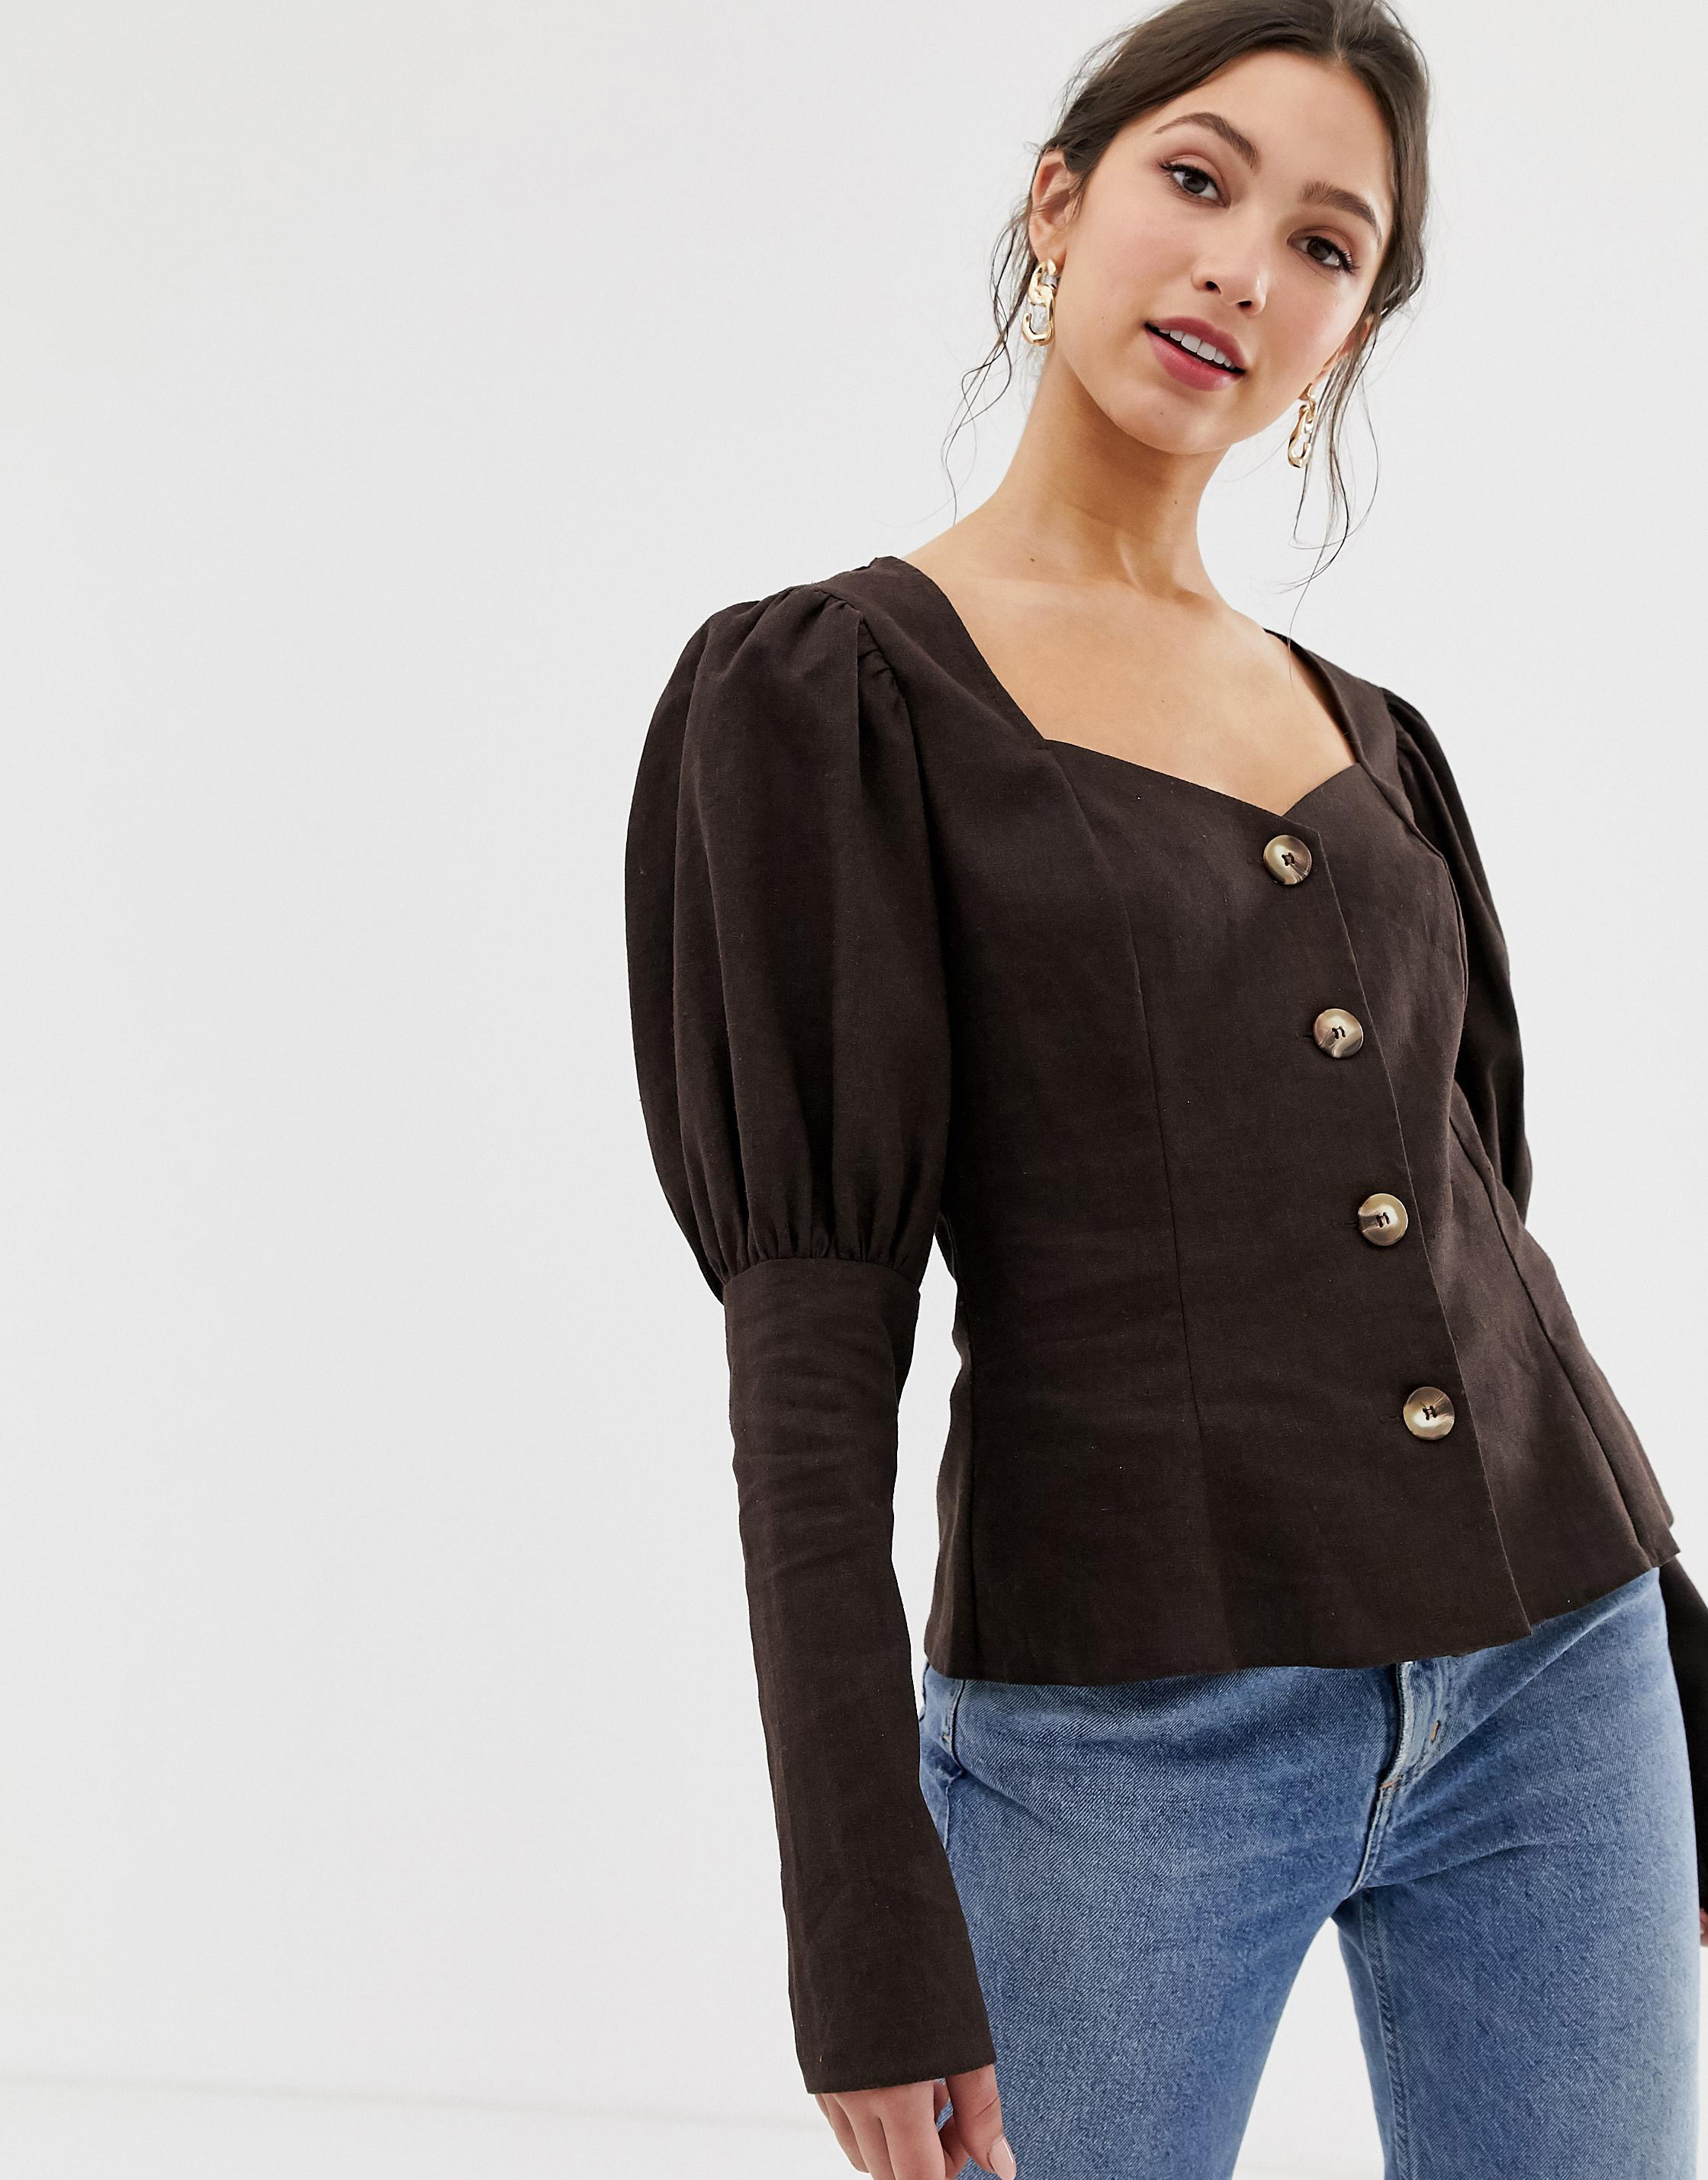 ASOS DESIGN Long Sleeve Sweetheart Neck Top in Linen with Contrast Buttons, £10.50 (was £30.00); jeans out of stock, ASOS